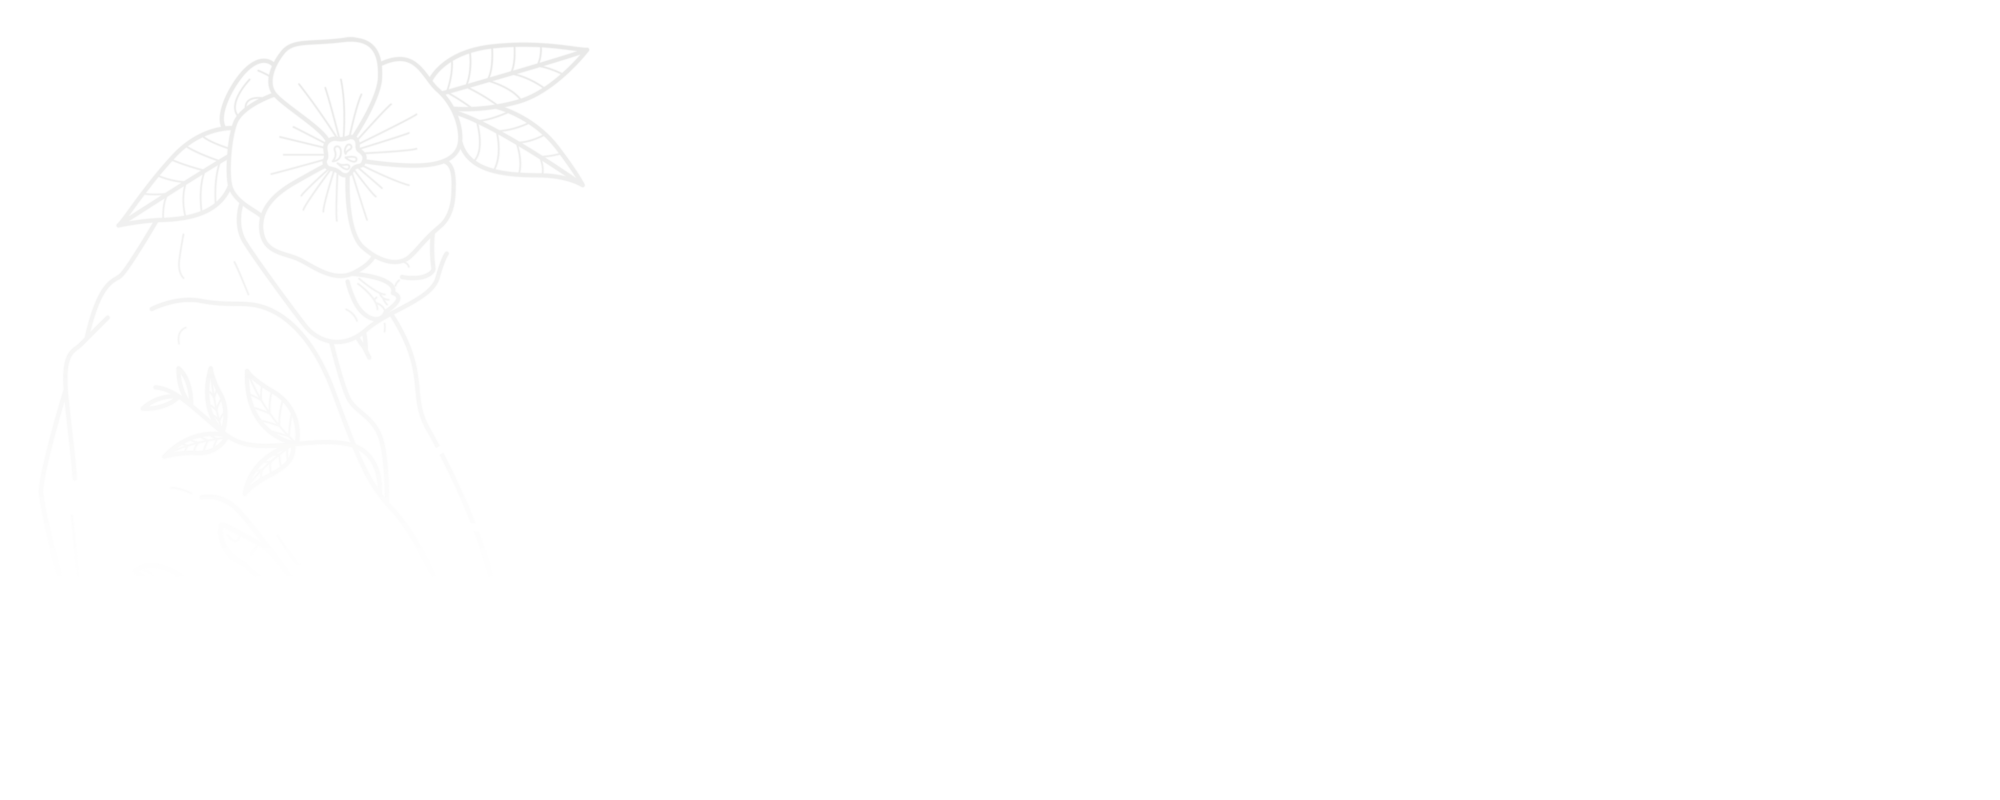 Vancouver Permanent Makeup & Paramedical Tattoos | Belle Ame Ink